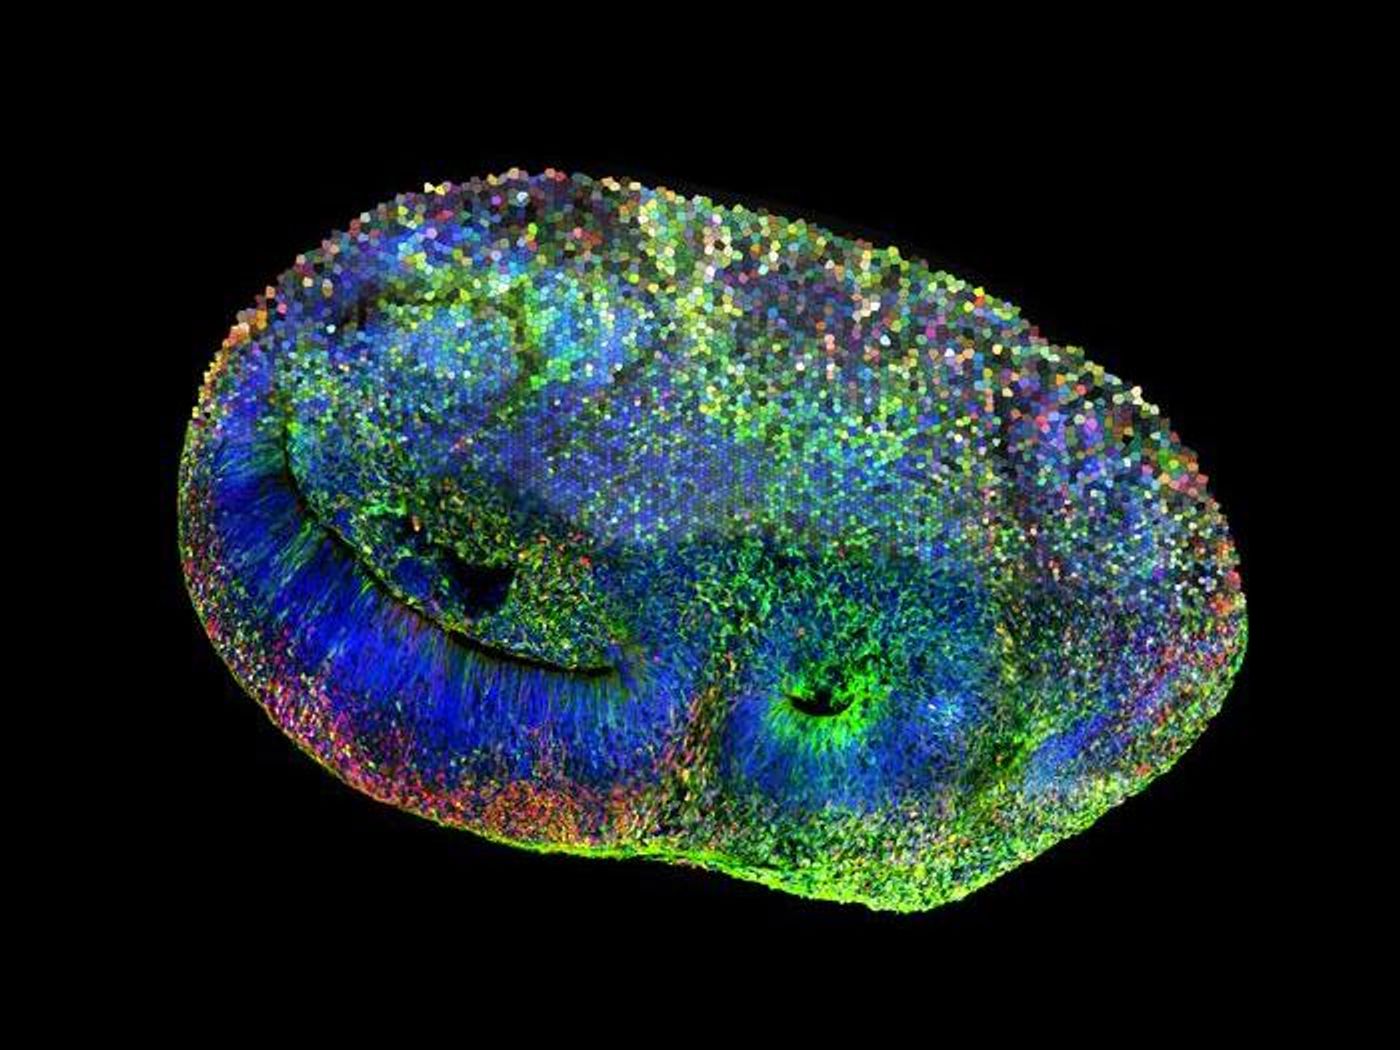 Bottom half: Confocal image of a CHOOSE (CRISPR-human organoids-scRNA-seq) human brain organoid mosaic system - cells carrying a mutation are red. Top half: a mosaic depiction of different colors representing single cells, each carrying a mutation in one high-confidence autism gene. / Credit: ©Knoblich Lab / IMBA-IMP Graphics